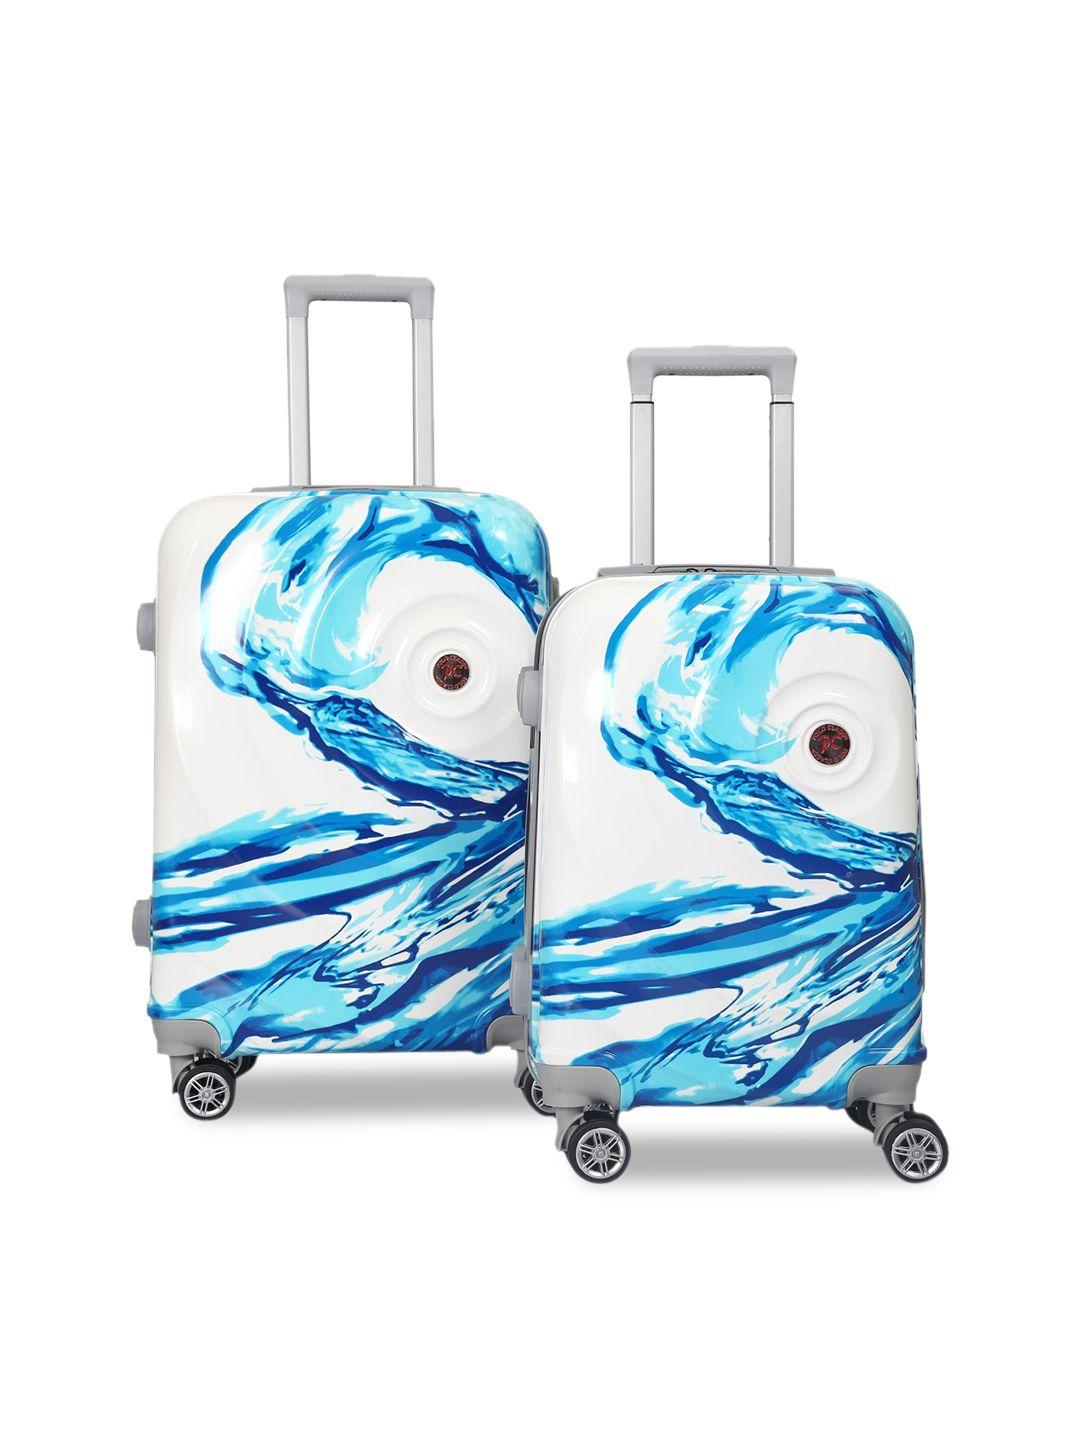 polo class set of 2 blue printed hard-sided trolley suitcases